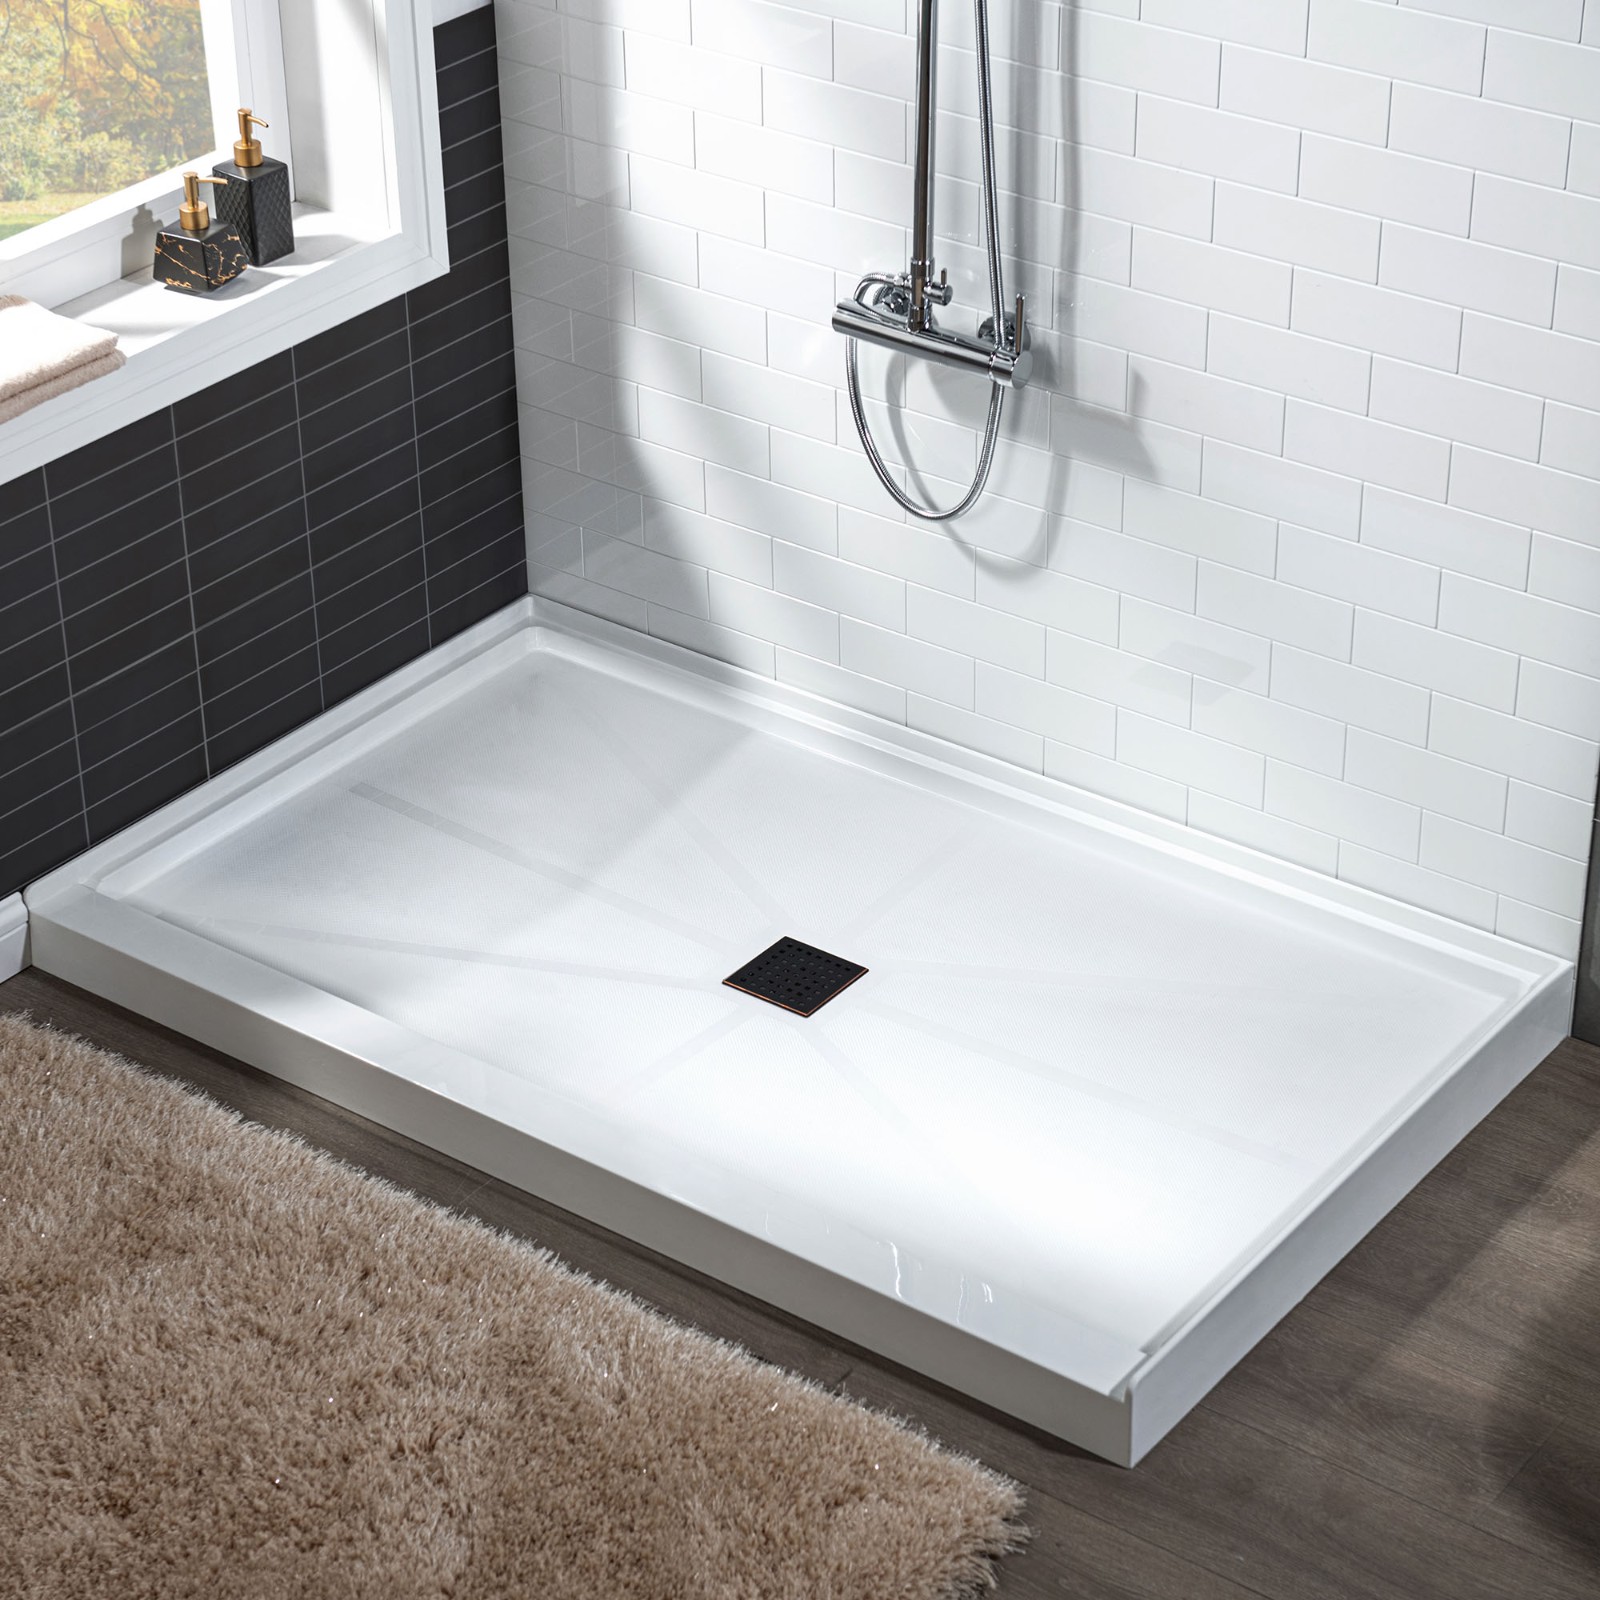  WOODBRIDGE SBR4832-1000C-ORB SolidSurface Shower Base with Recessed Trench Side Including Oil Rubbed Bronze Linear Cover, 48